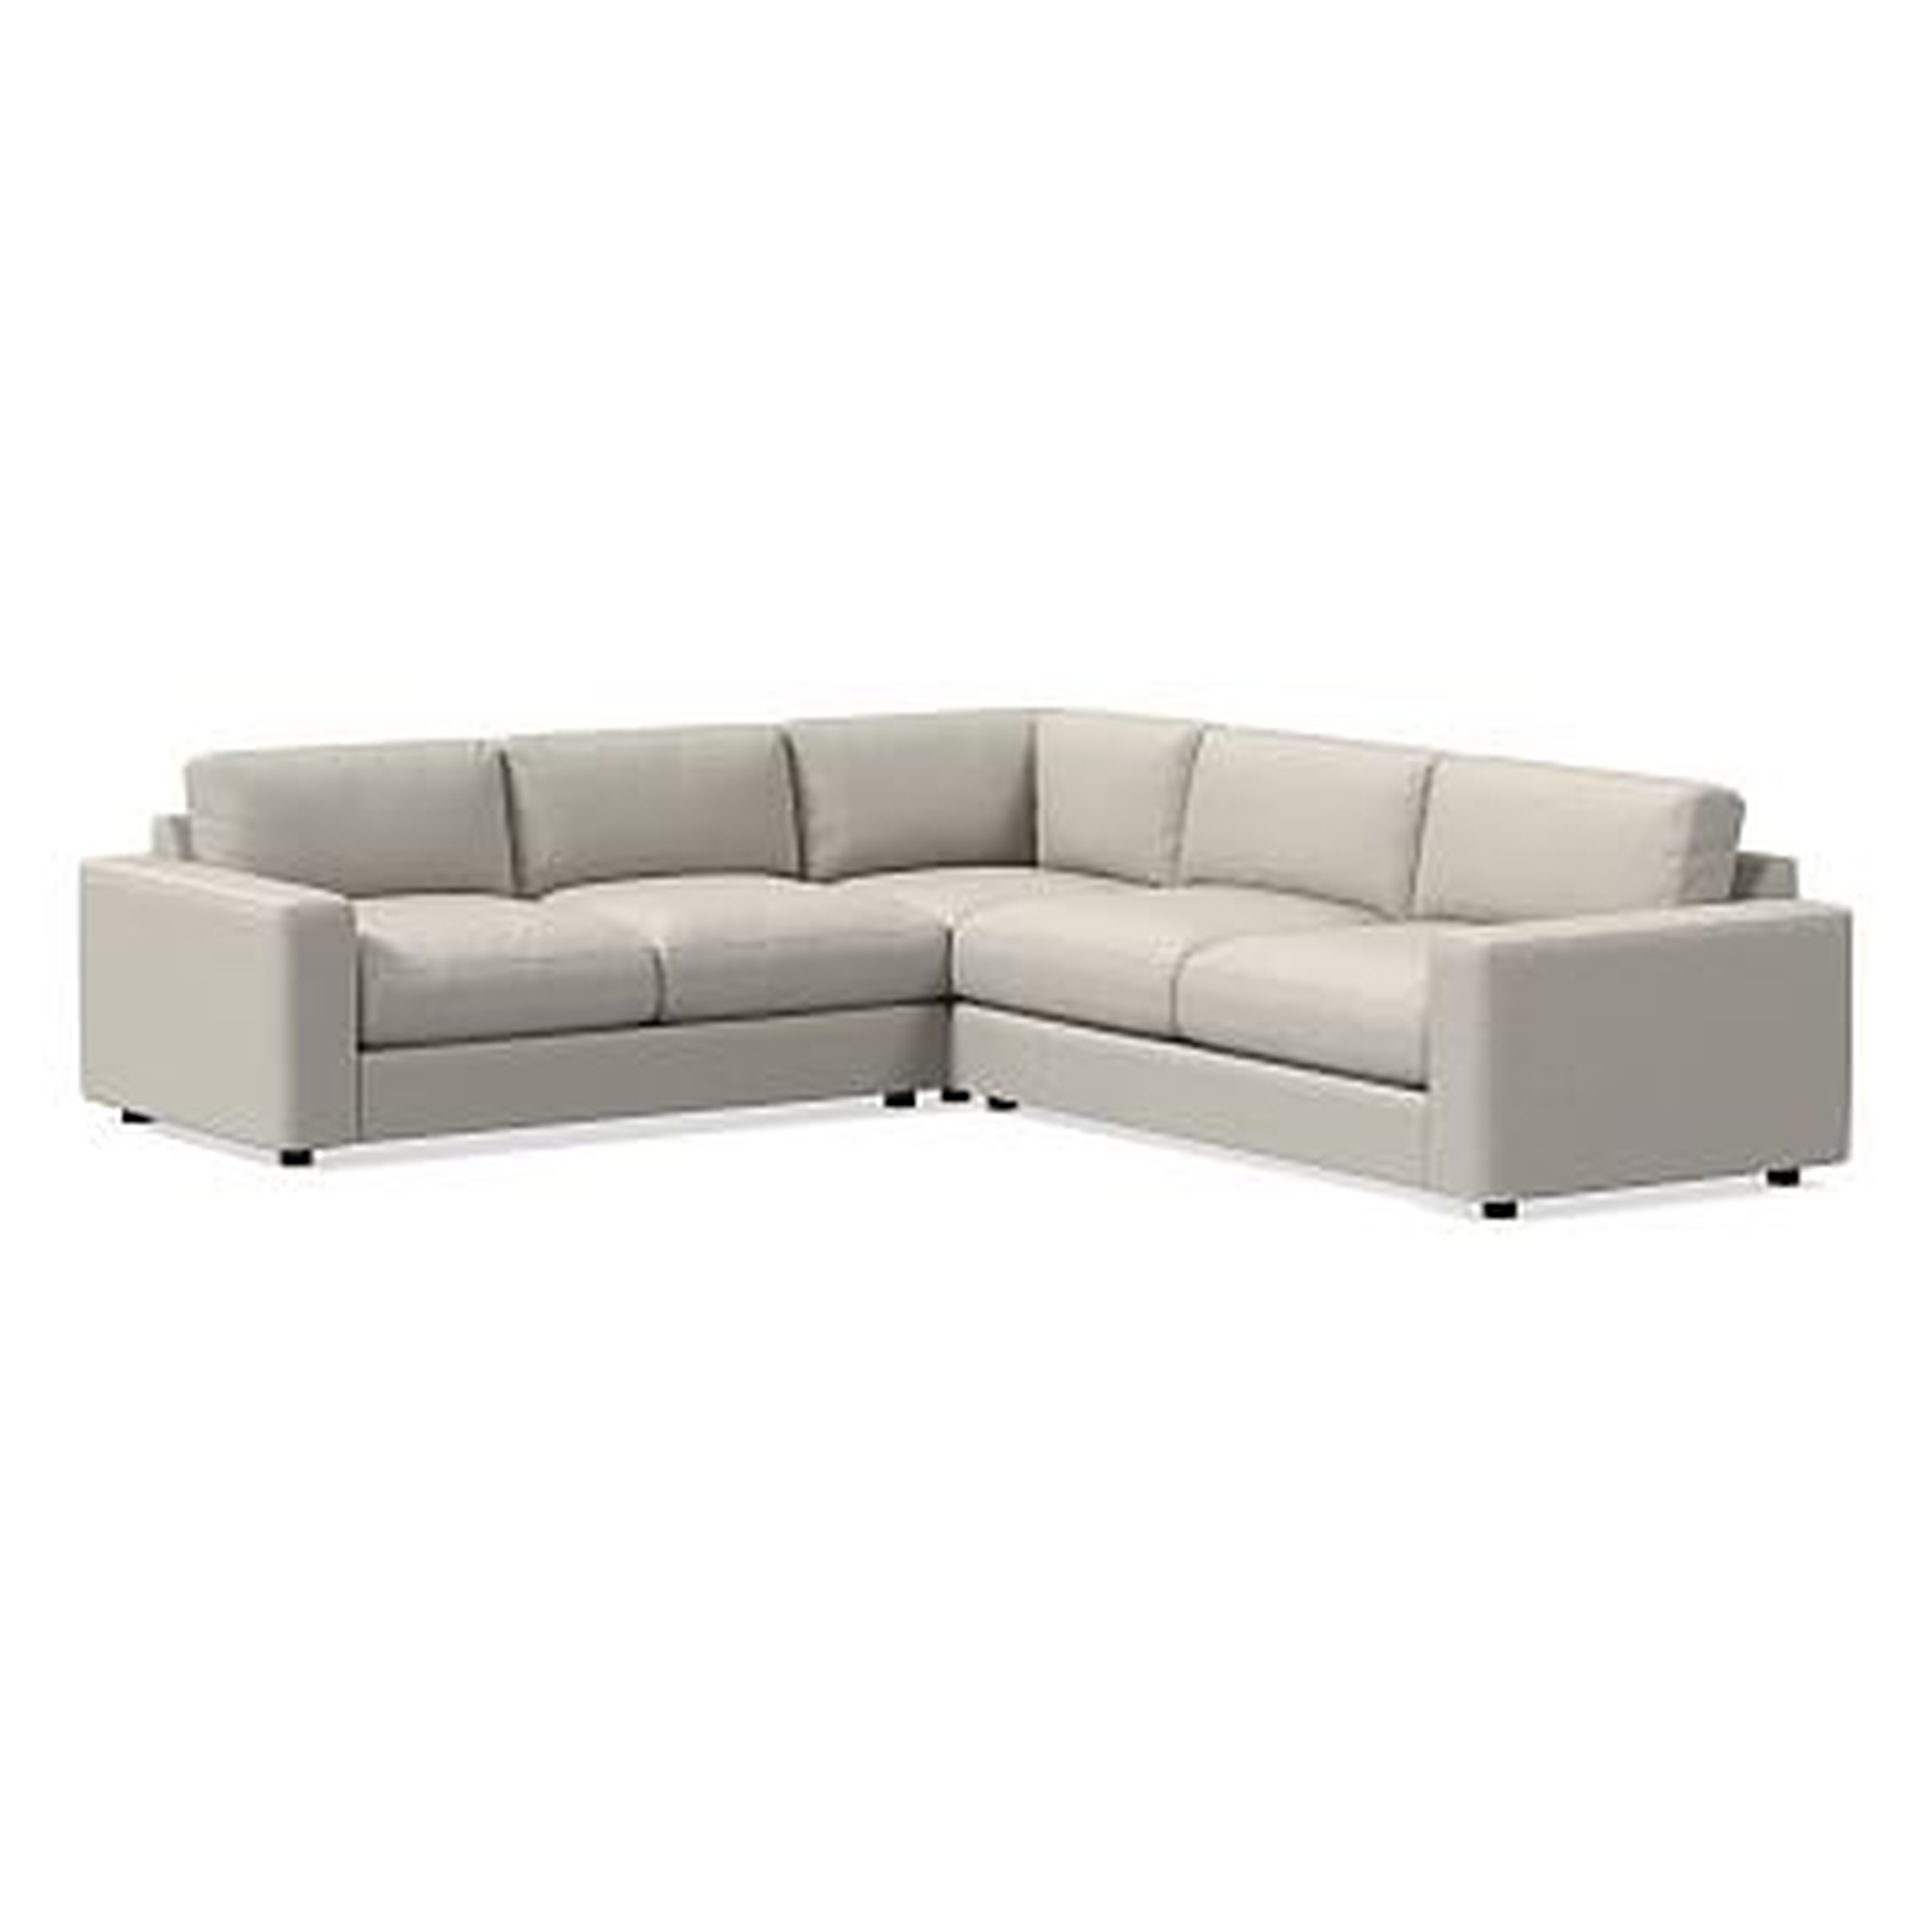 Urban Sectional Set 08: Left Arm 2 Seater Sofa, Corner, Right Arm 3 Seater Sofa, Down Blend, Performance Twill, Dove, Concealed Supports - West Elm